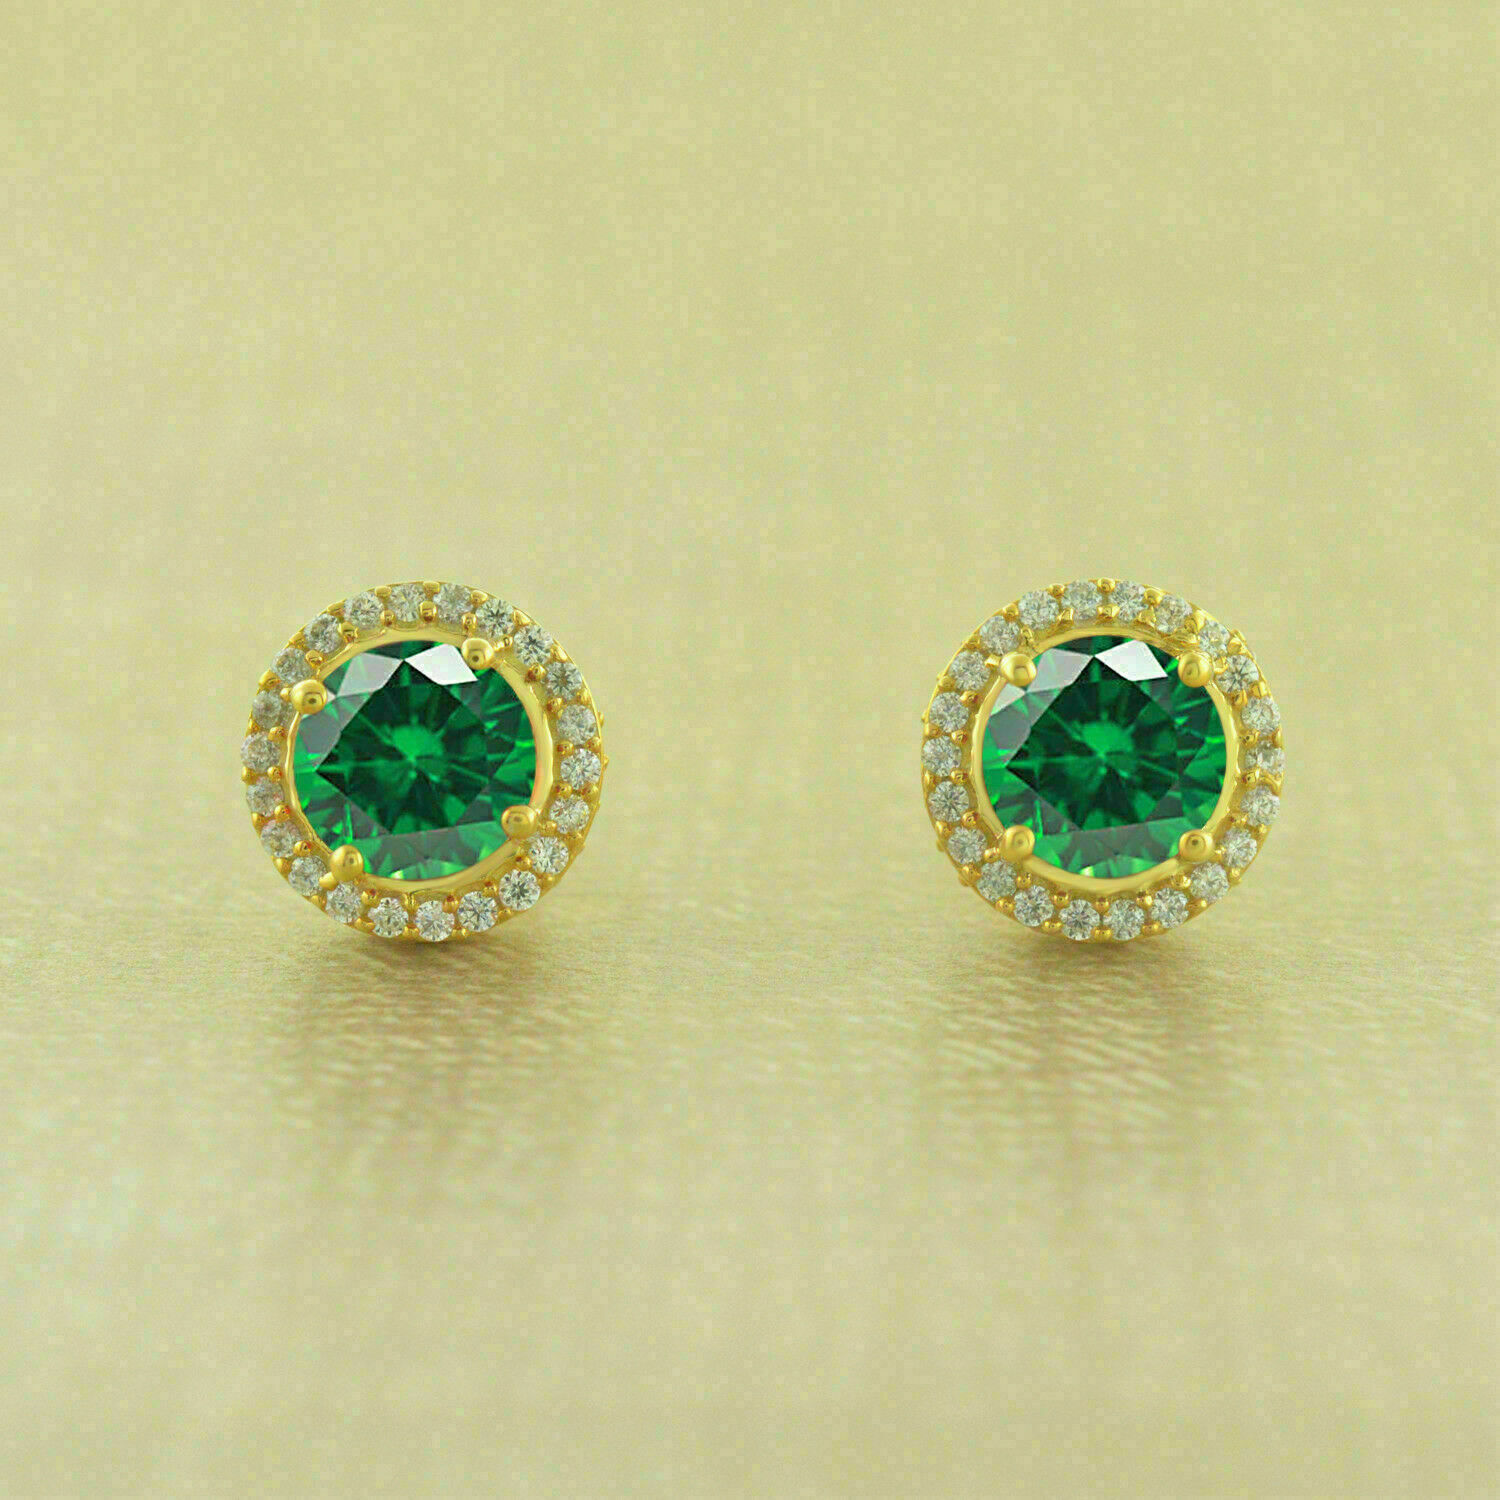 3.50Ct Round Simulated Emerald  & Fancy Stud Earrings 14K Yellow Gold Plated - $98.00